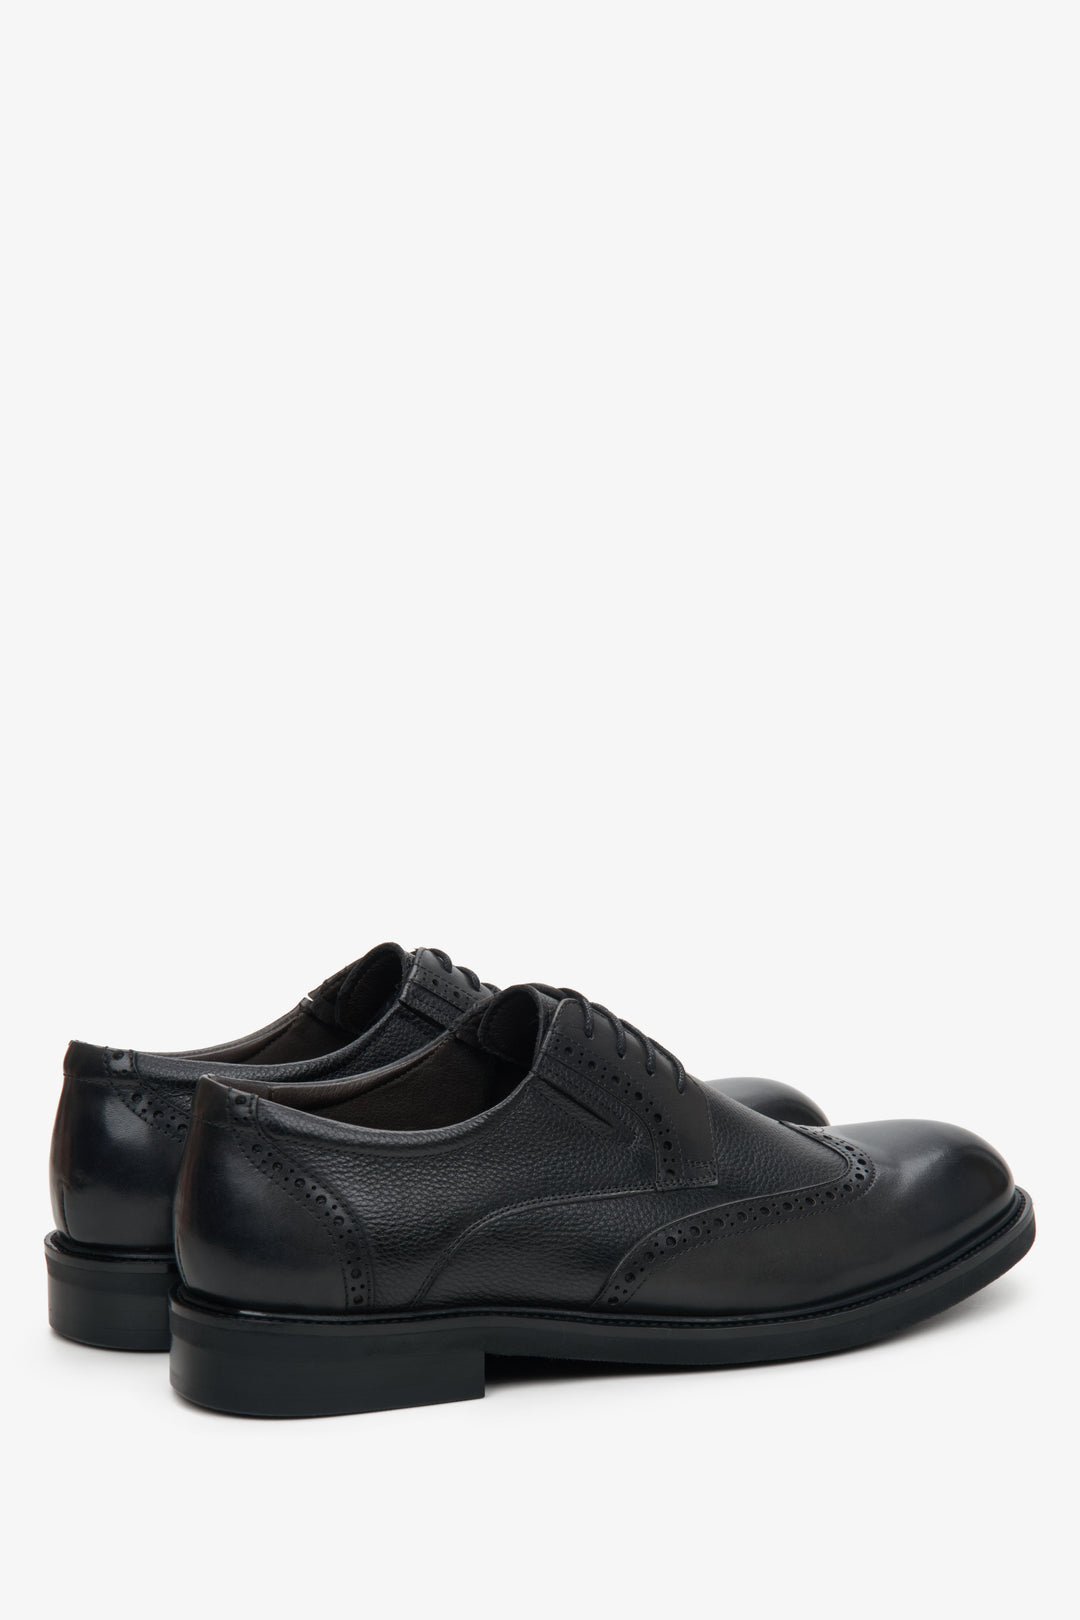 Men's black leather lace-up shoes by Estro - close-up on the side line.